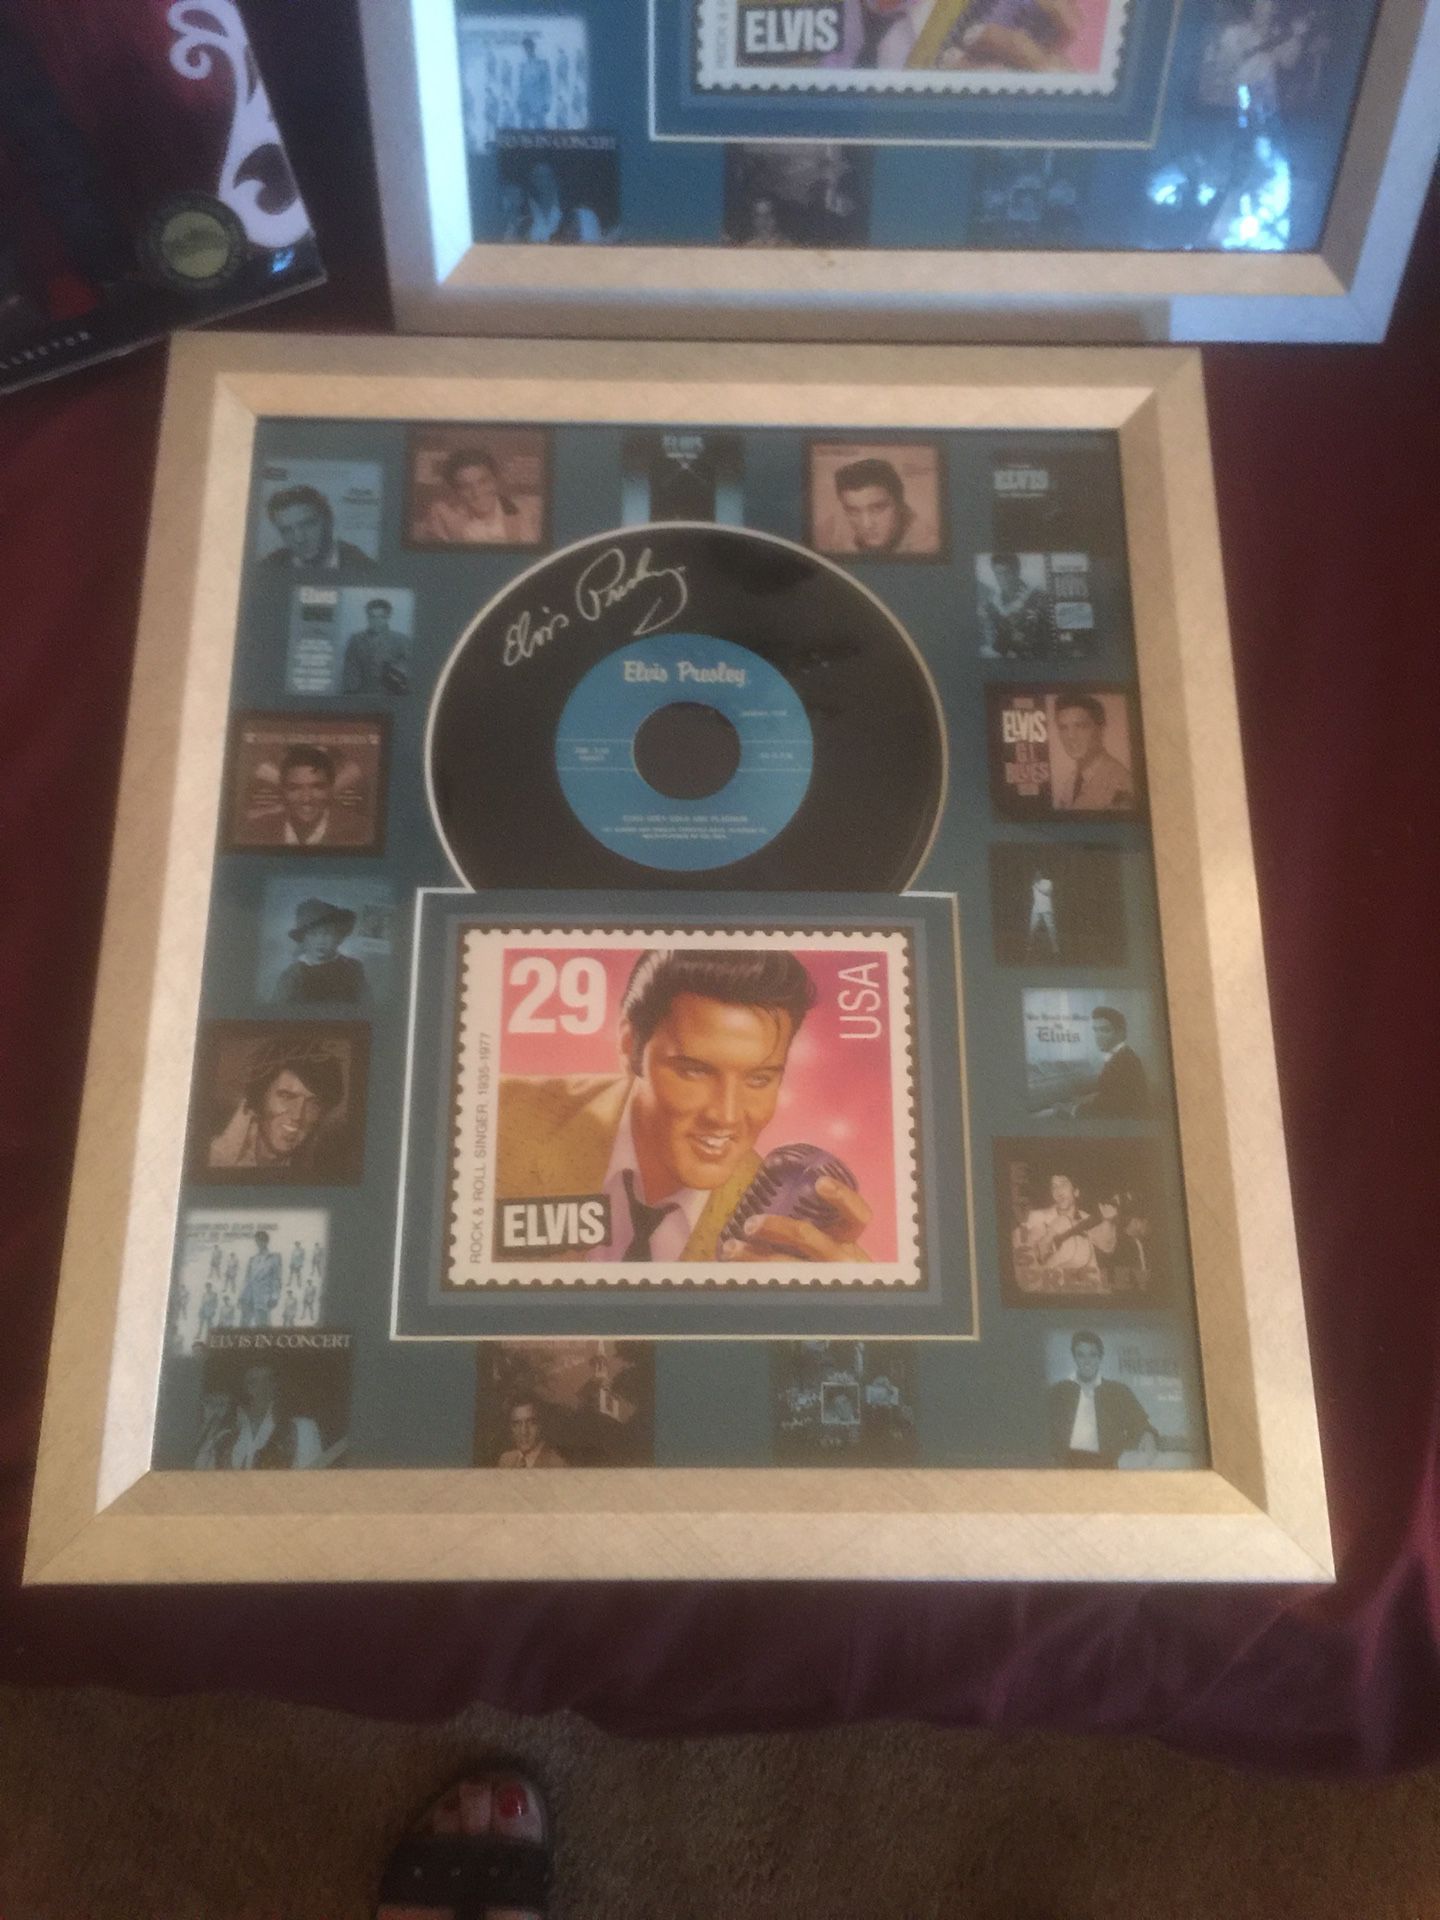 ELVIS COLLECTION, FRAMED SIGNATURE RECORD AND STAMP